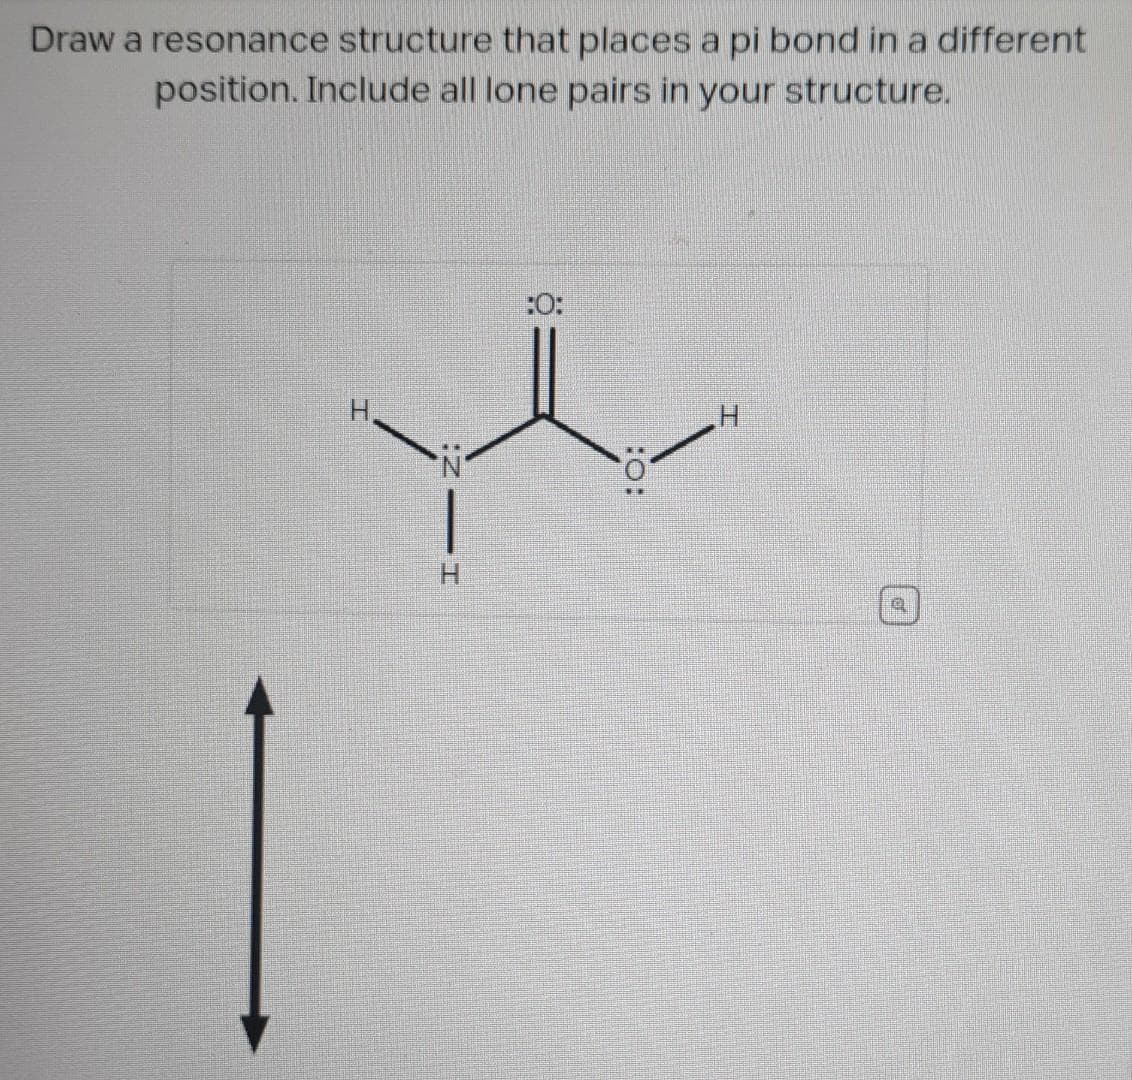 Draw a resonance structure that places a pi bond in a different
position. Include all lone pairs in your structure.
ZI
:0: